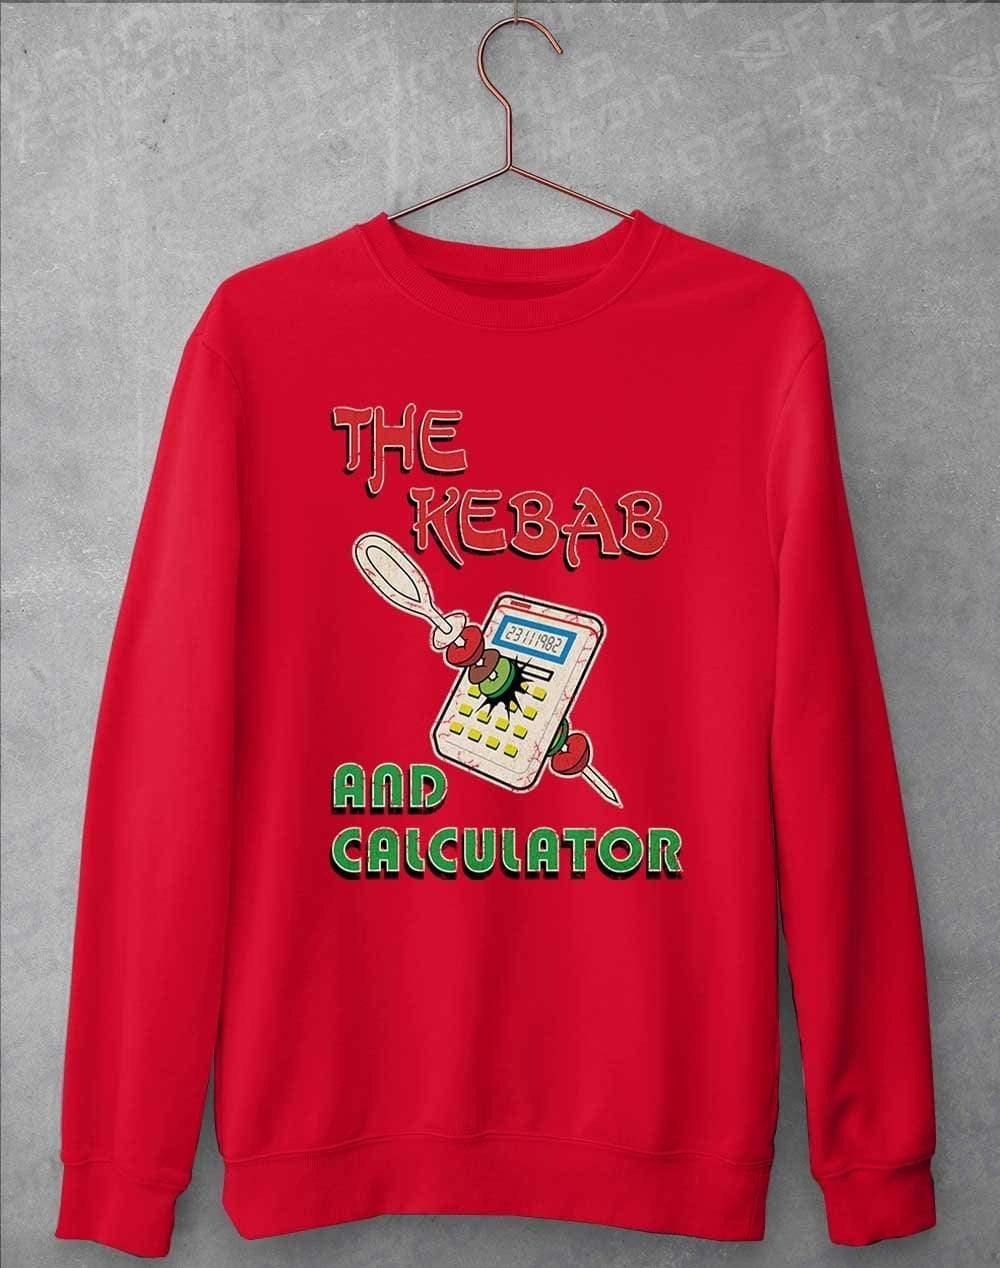 The Kebab and Calculator 1982 Sweatshirt S / Fire Red  - Off World Tees